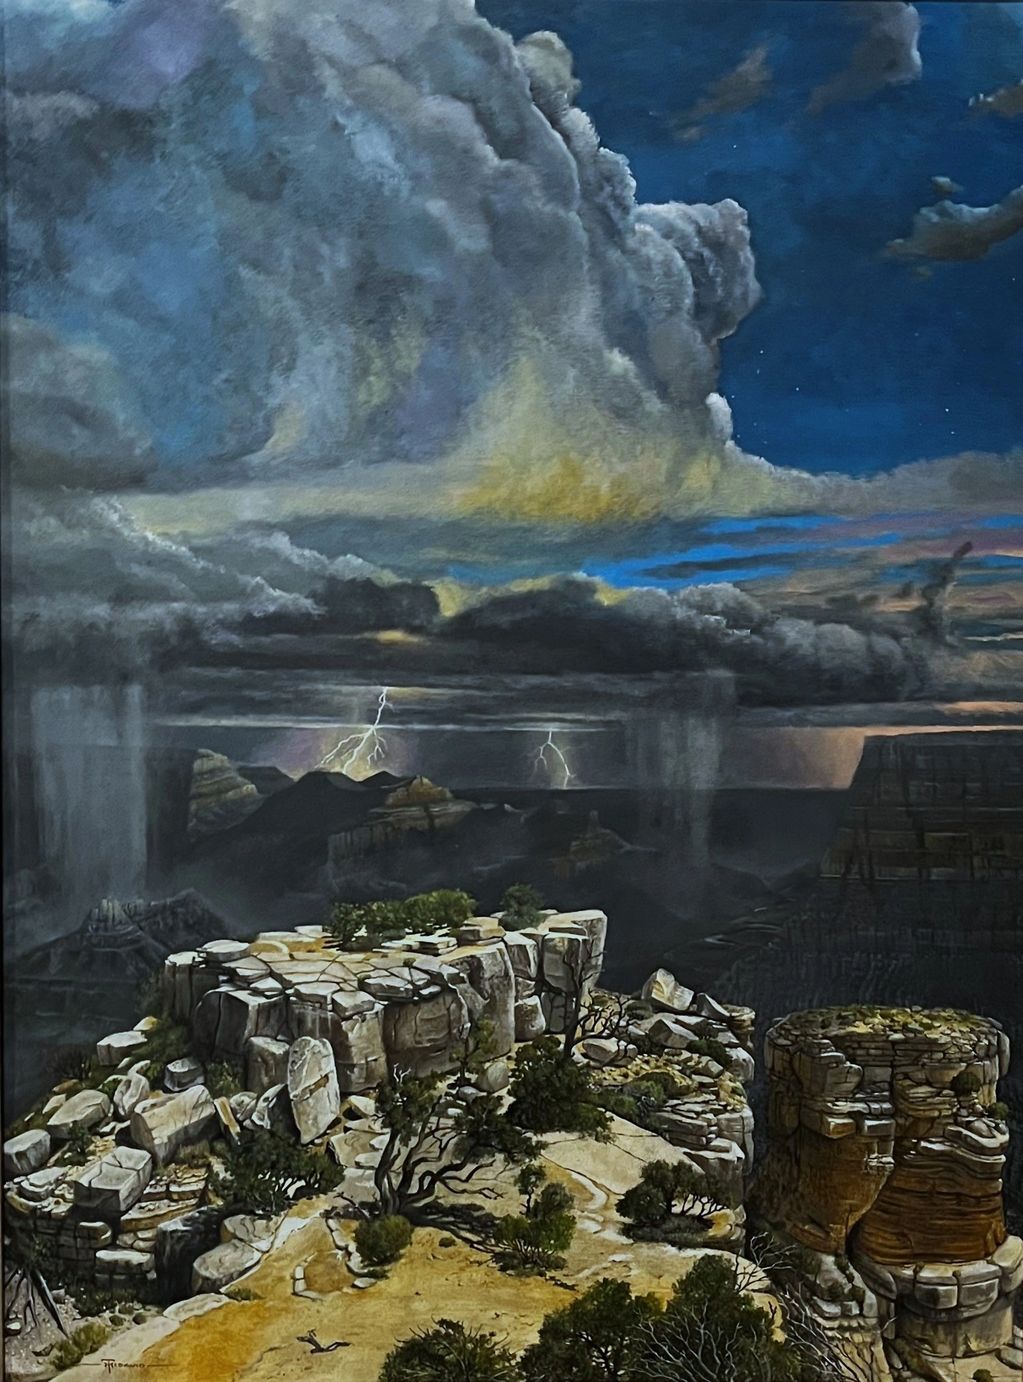 Moran Point in moonlight as storm approaches from the east.
40 x 30 oil on canvas